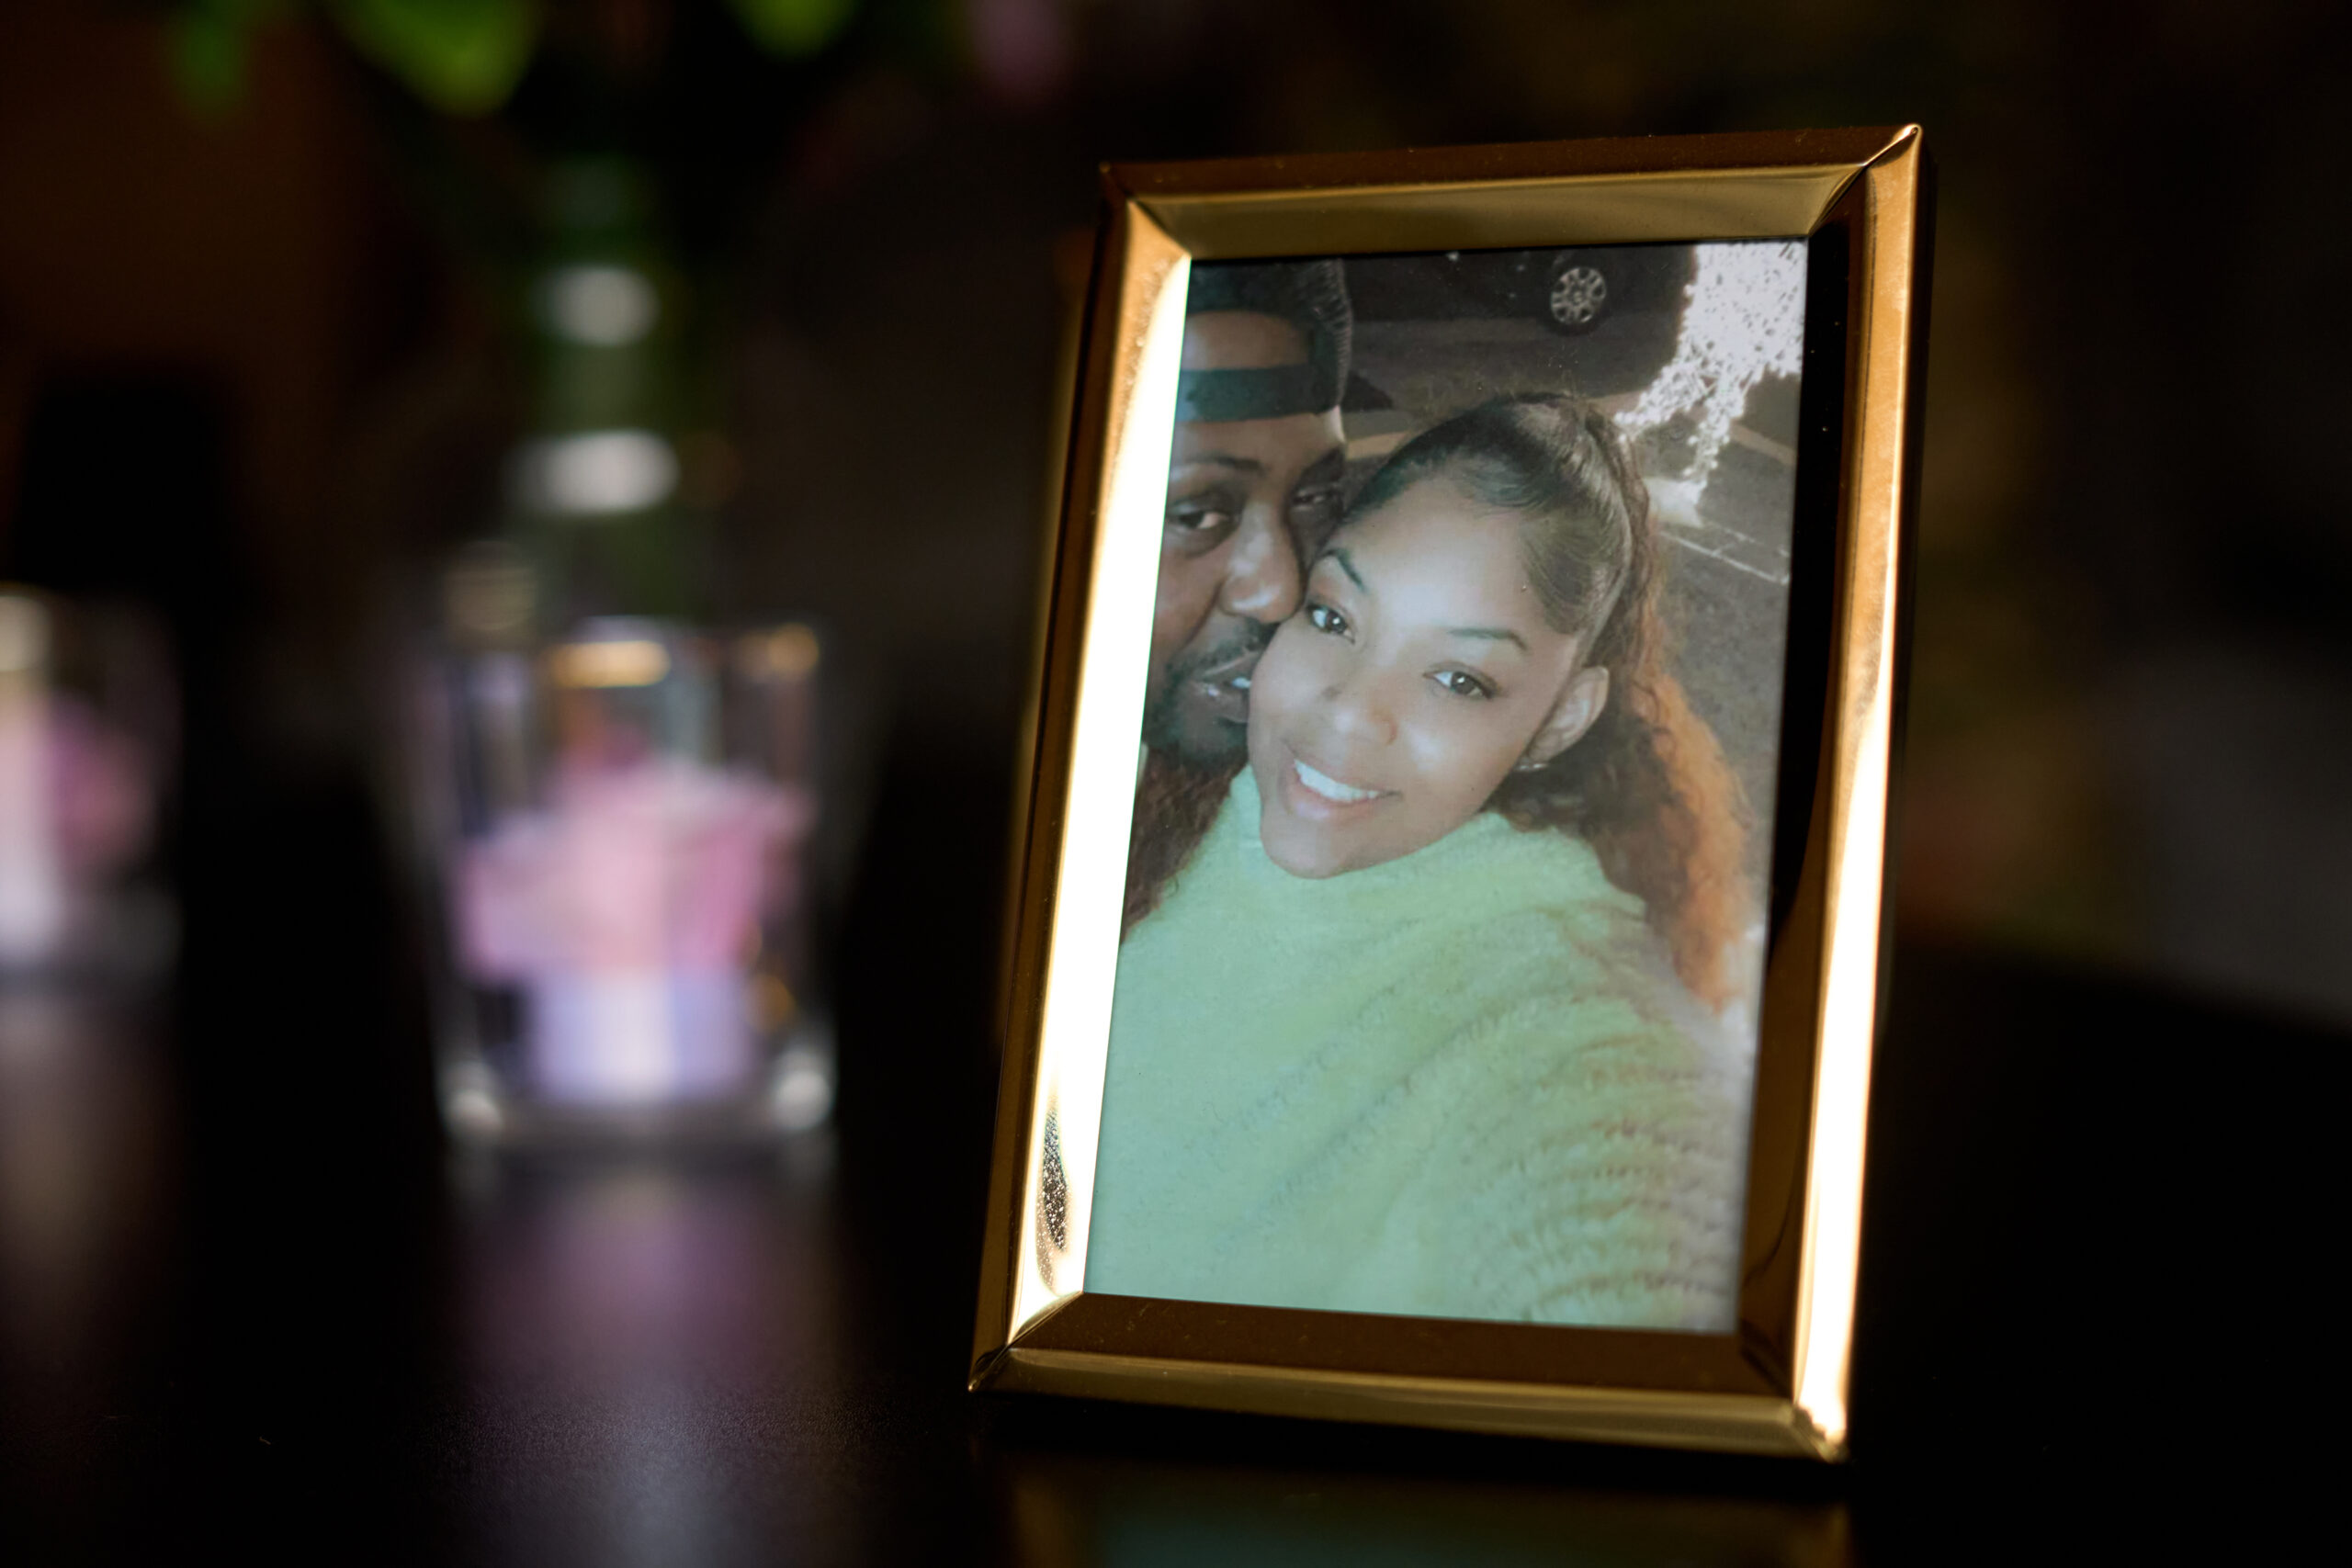 A gold frame on a table shows a photo of a Black couple, a young man with a beard and a young, smiling woman her hair tied back in a ponytail. The man is kissing the woman on the cheek. 